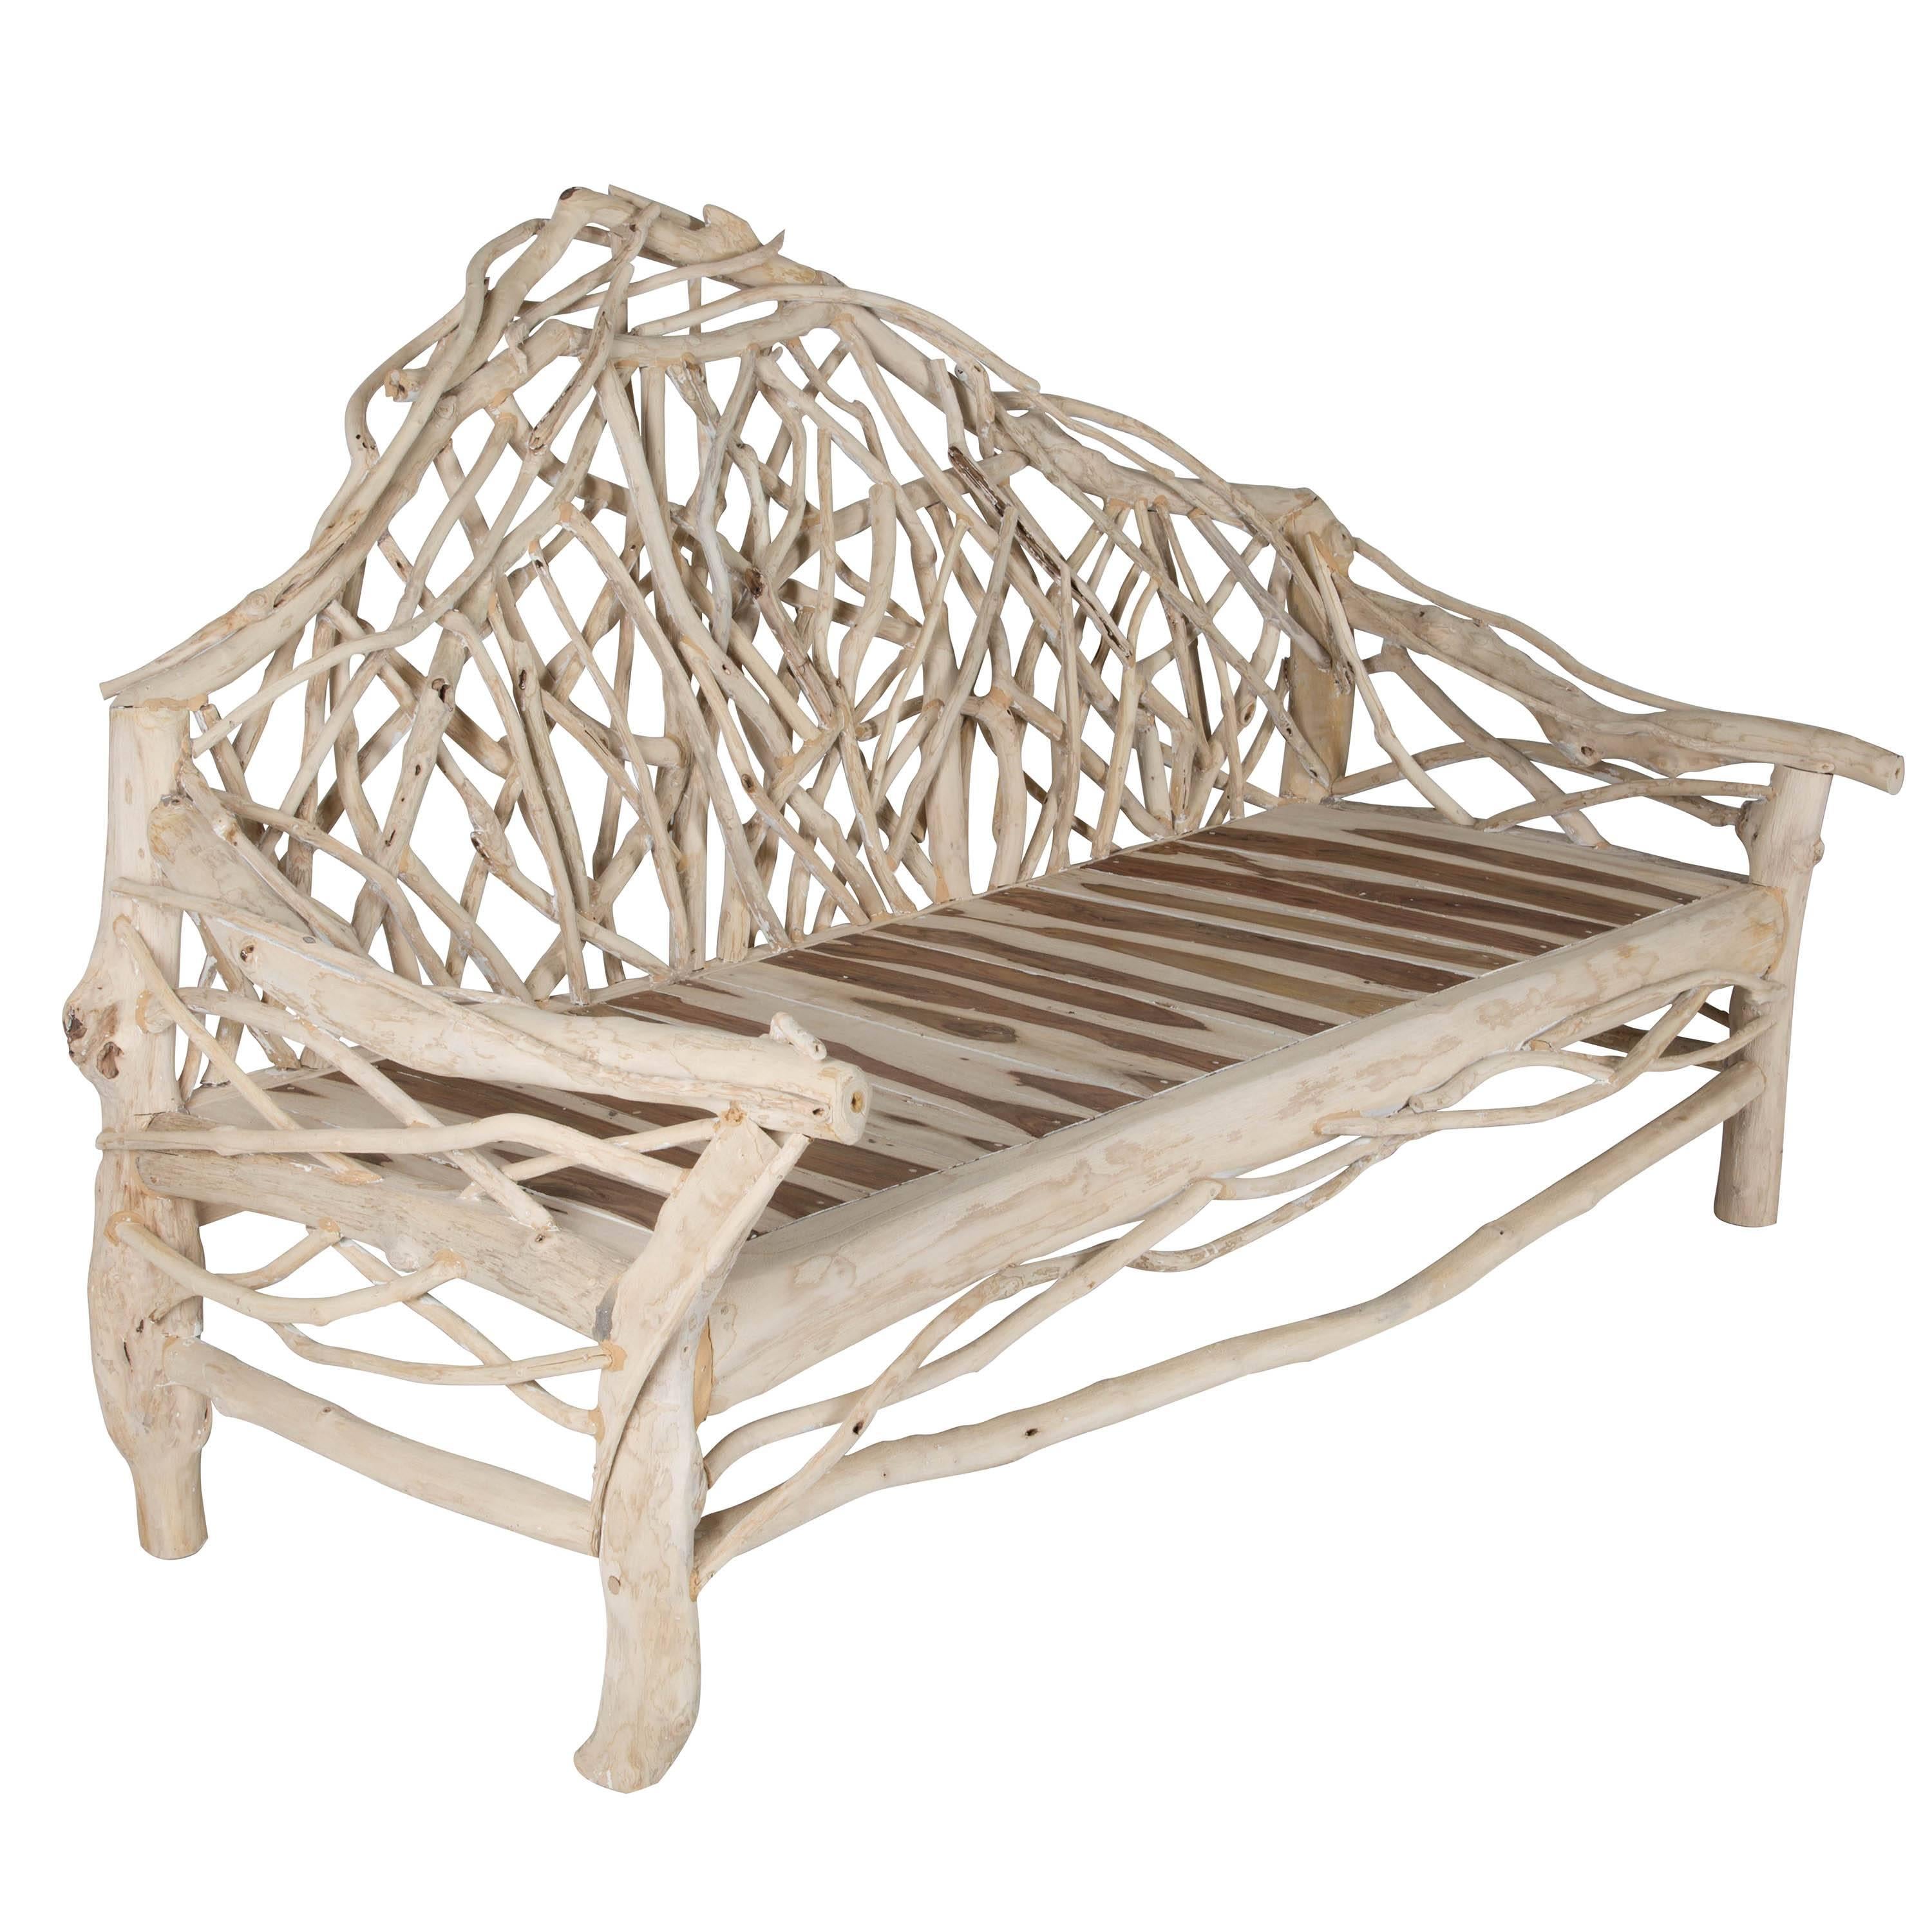 Grand scale late 20th century Indonesian mangrove root bench.